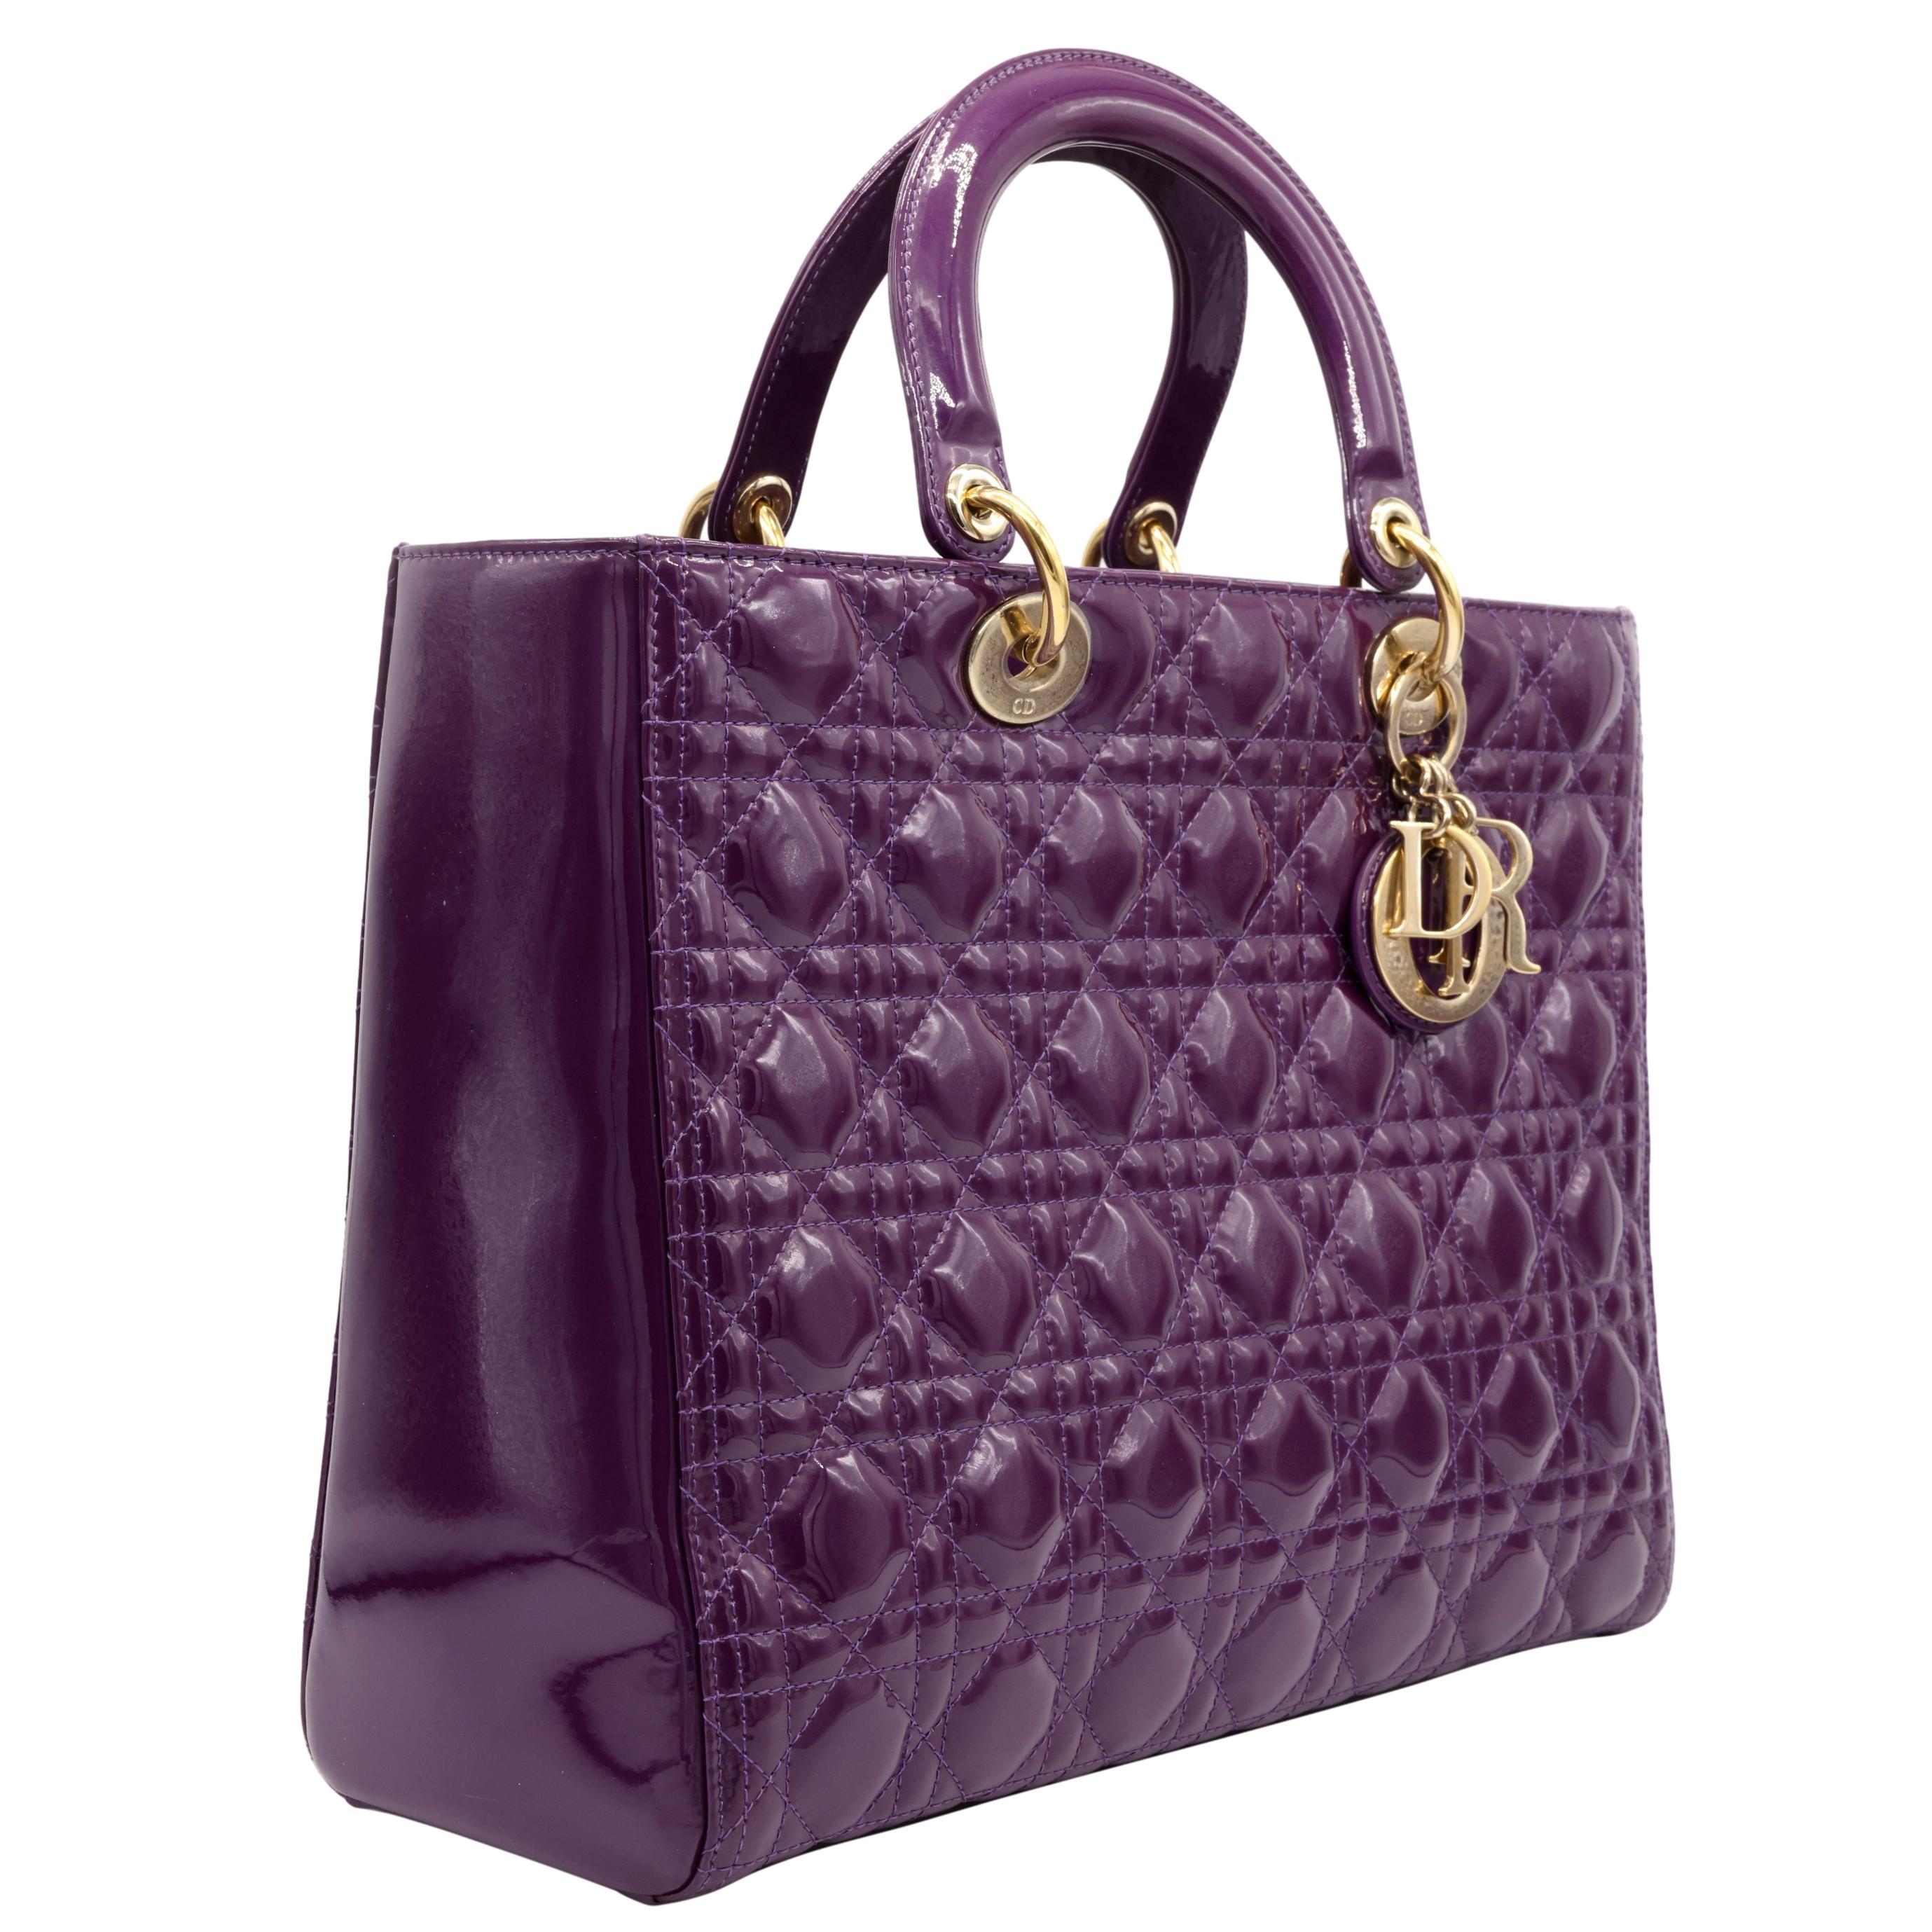 Dior Purple Cannage Patent Leather Large Lady Dior Tote Shoulder Bag. First introduced in 1994 as the 